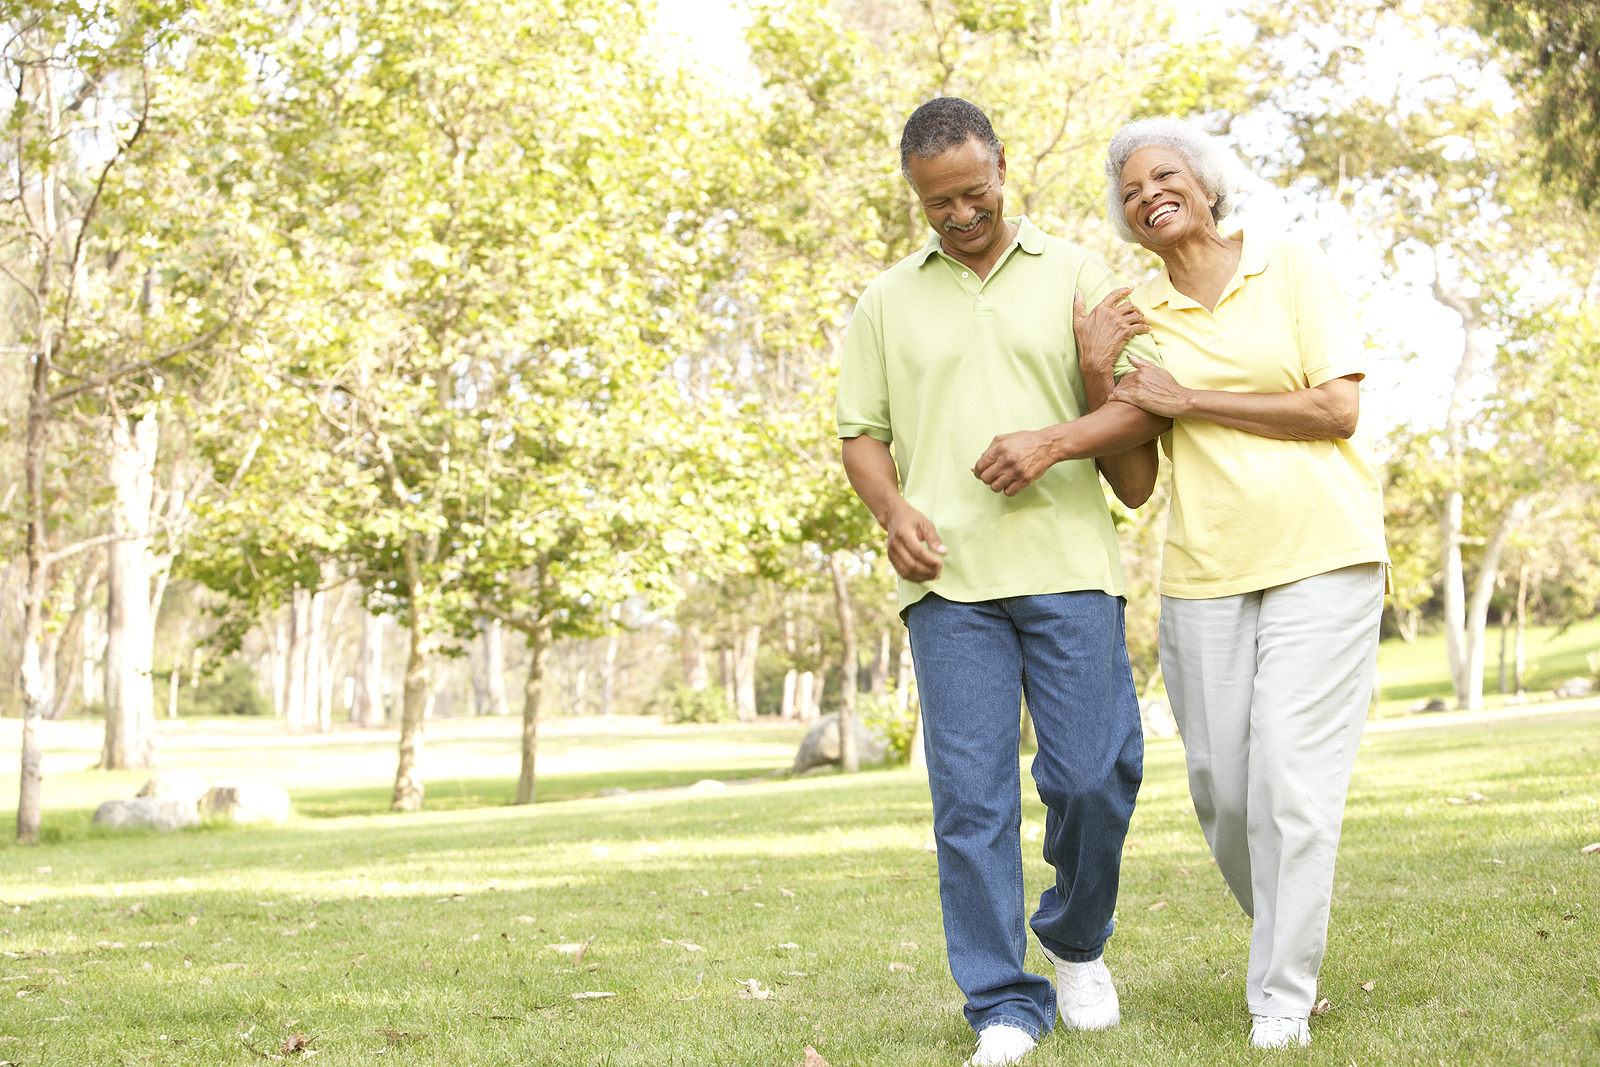 A smiling senior couple walks in the park, happy to be enjoying some fun senior activities.